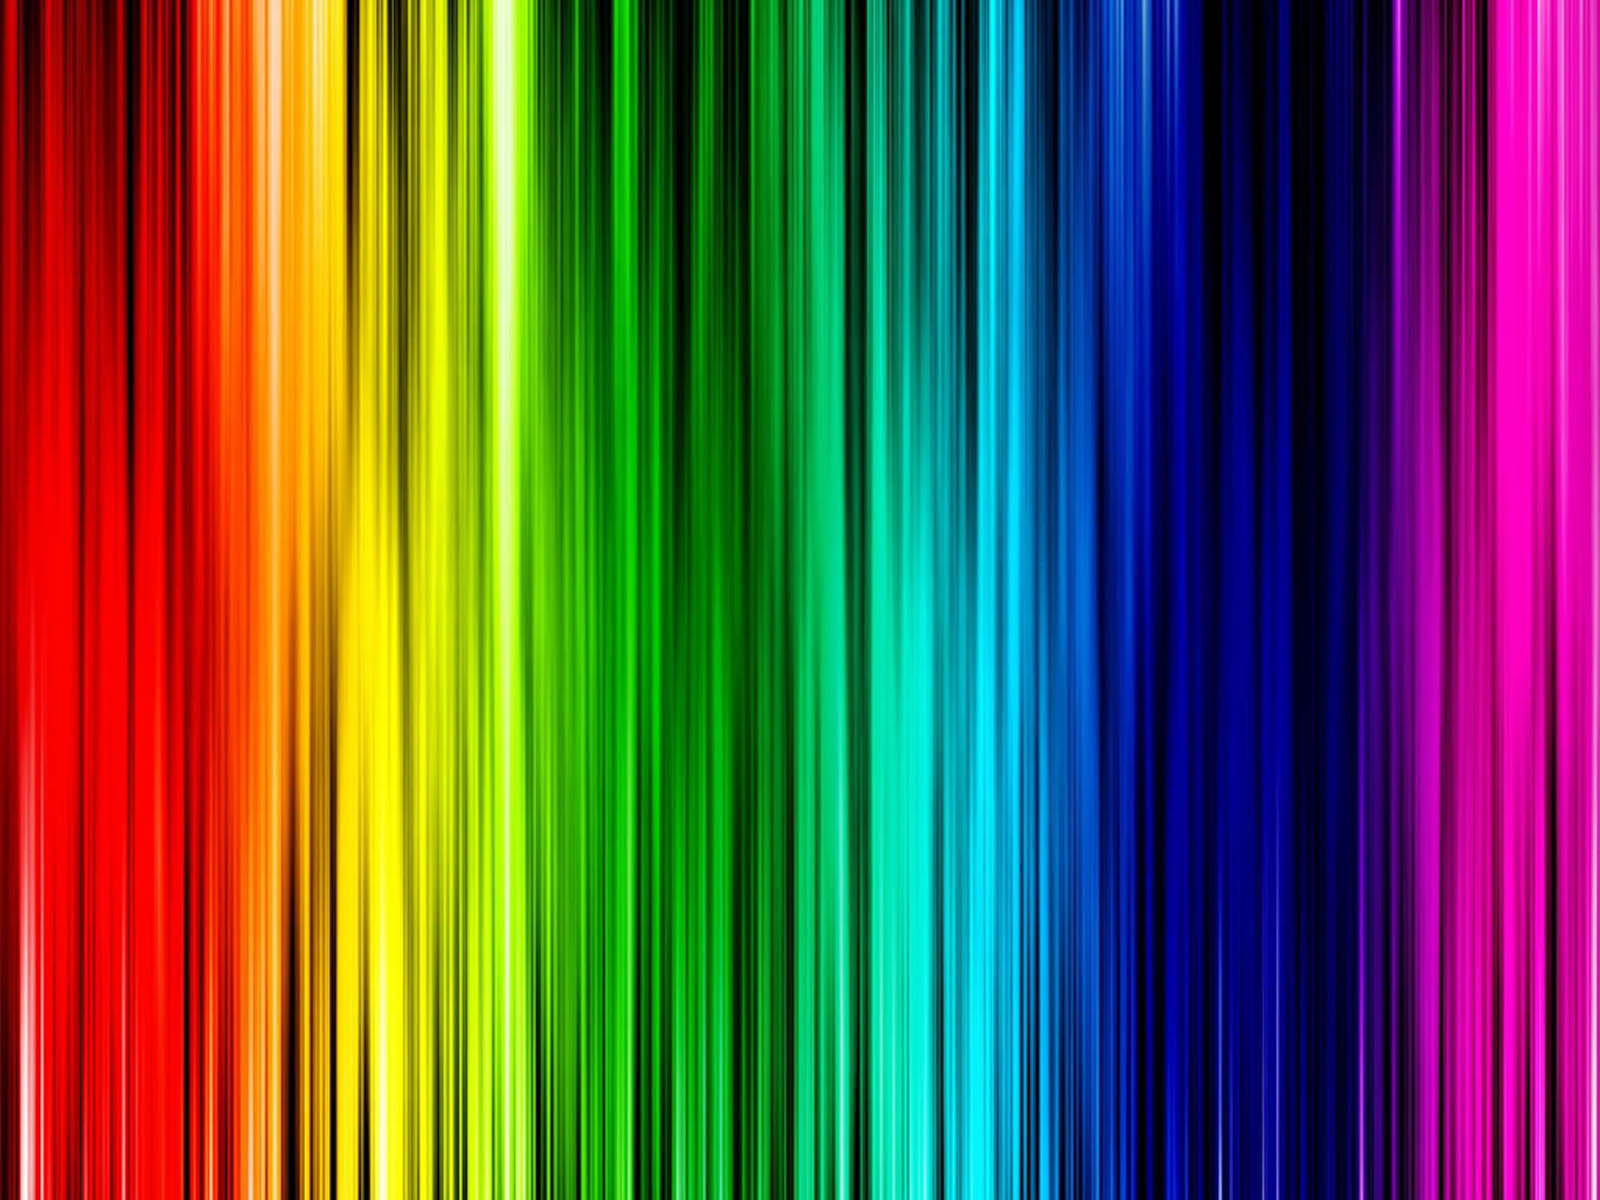 Wallpapers Abstract Rainbow Colours Wallpapers HD Wallpapers Download Free Map Images Wallpaper [wallpaper376.blogspot.com]